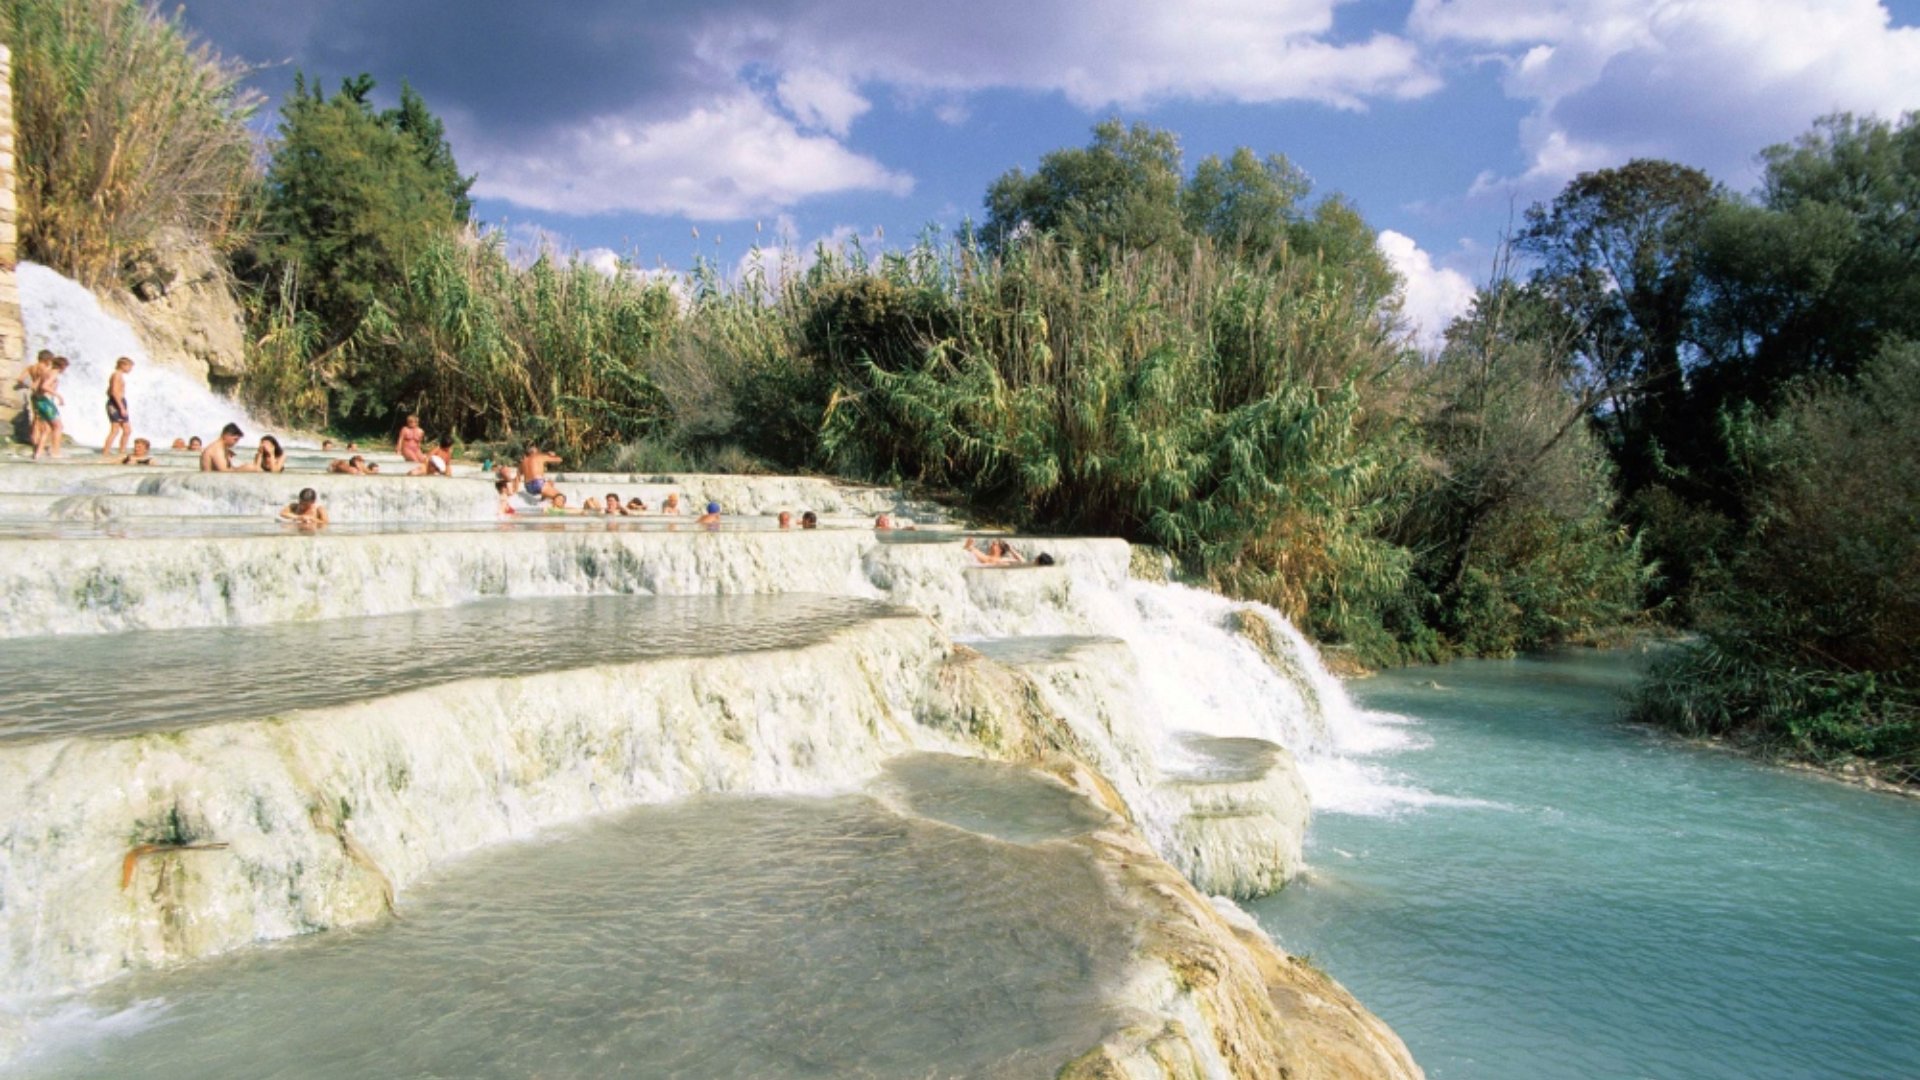 The Thermal Baths of Saturnia